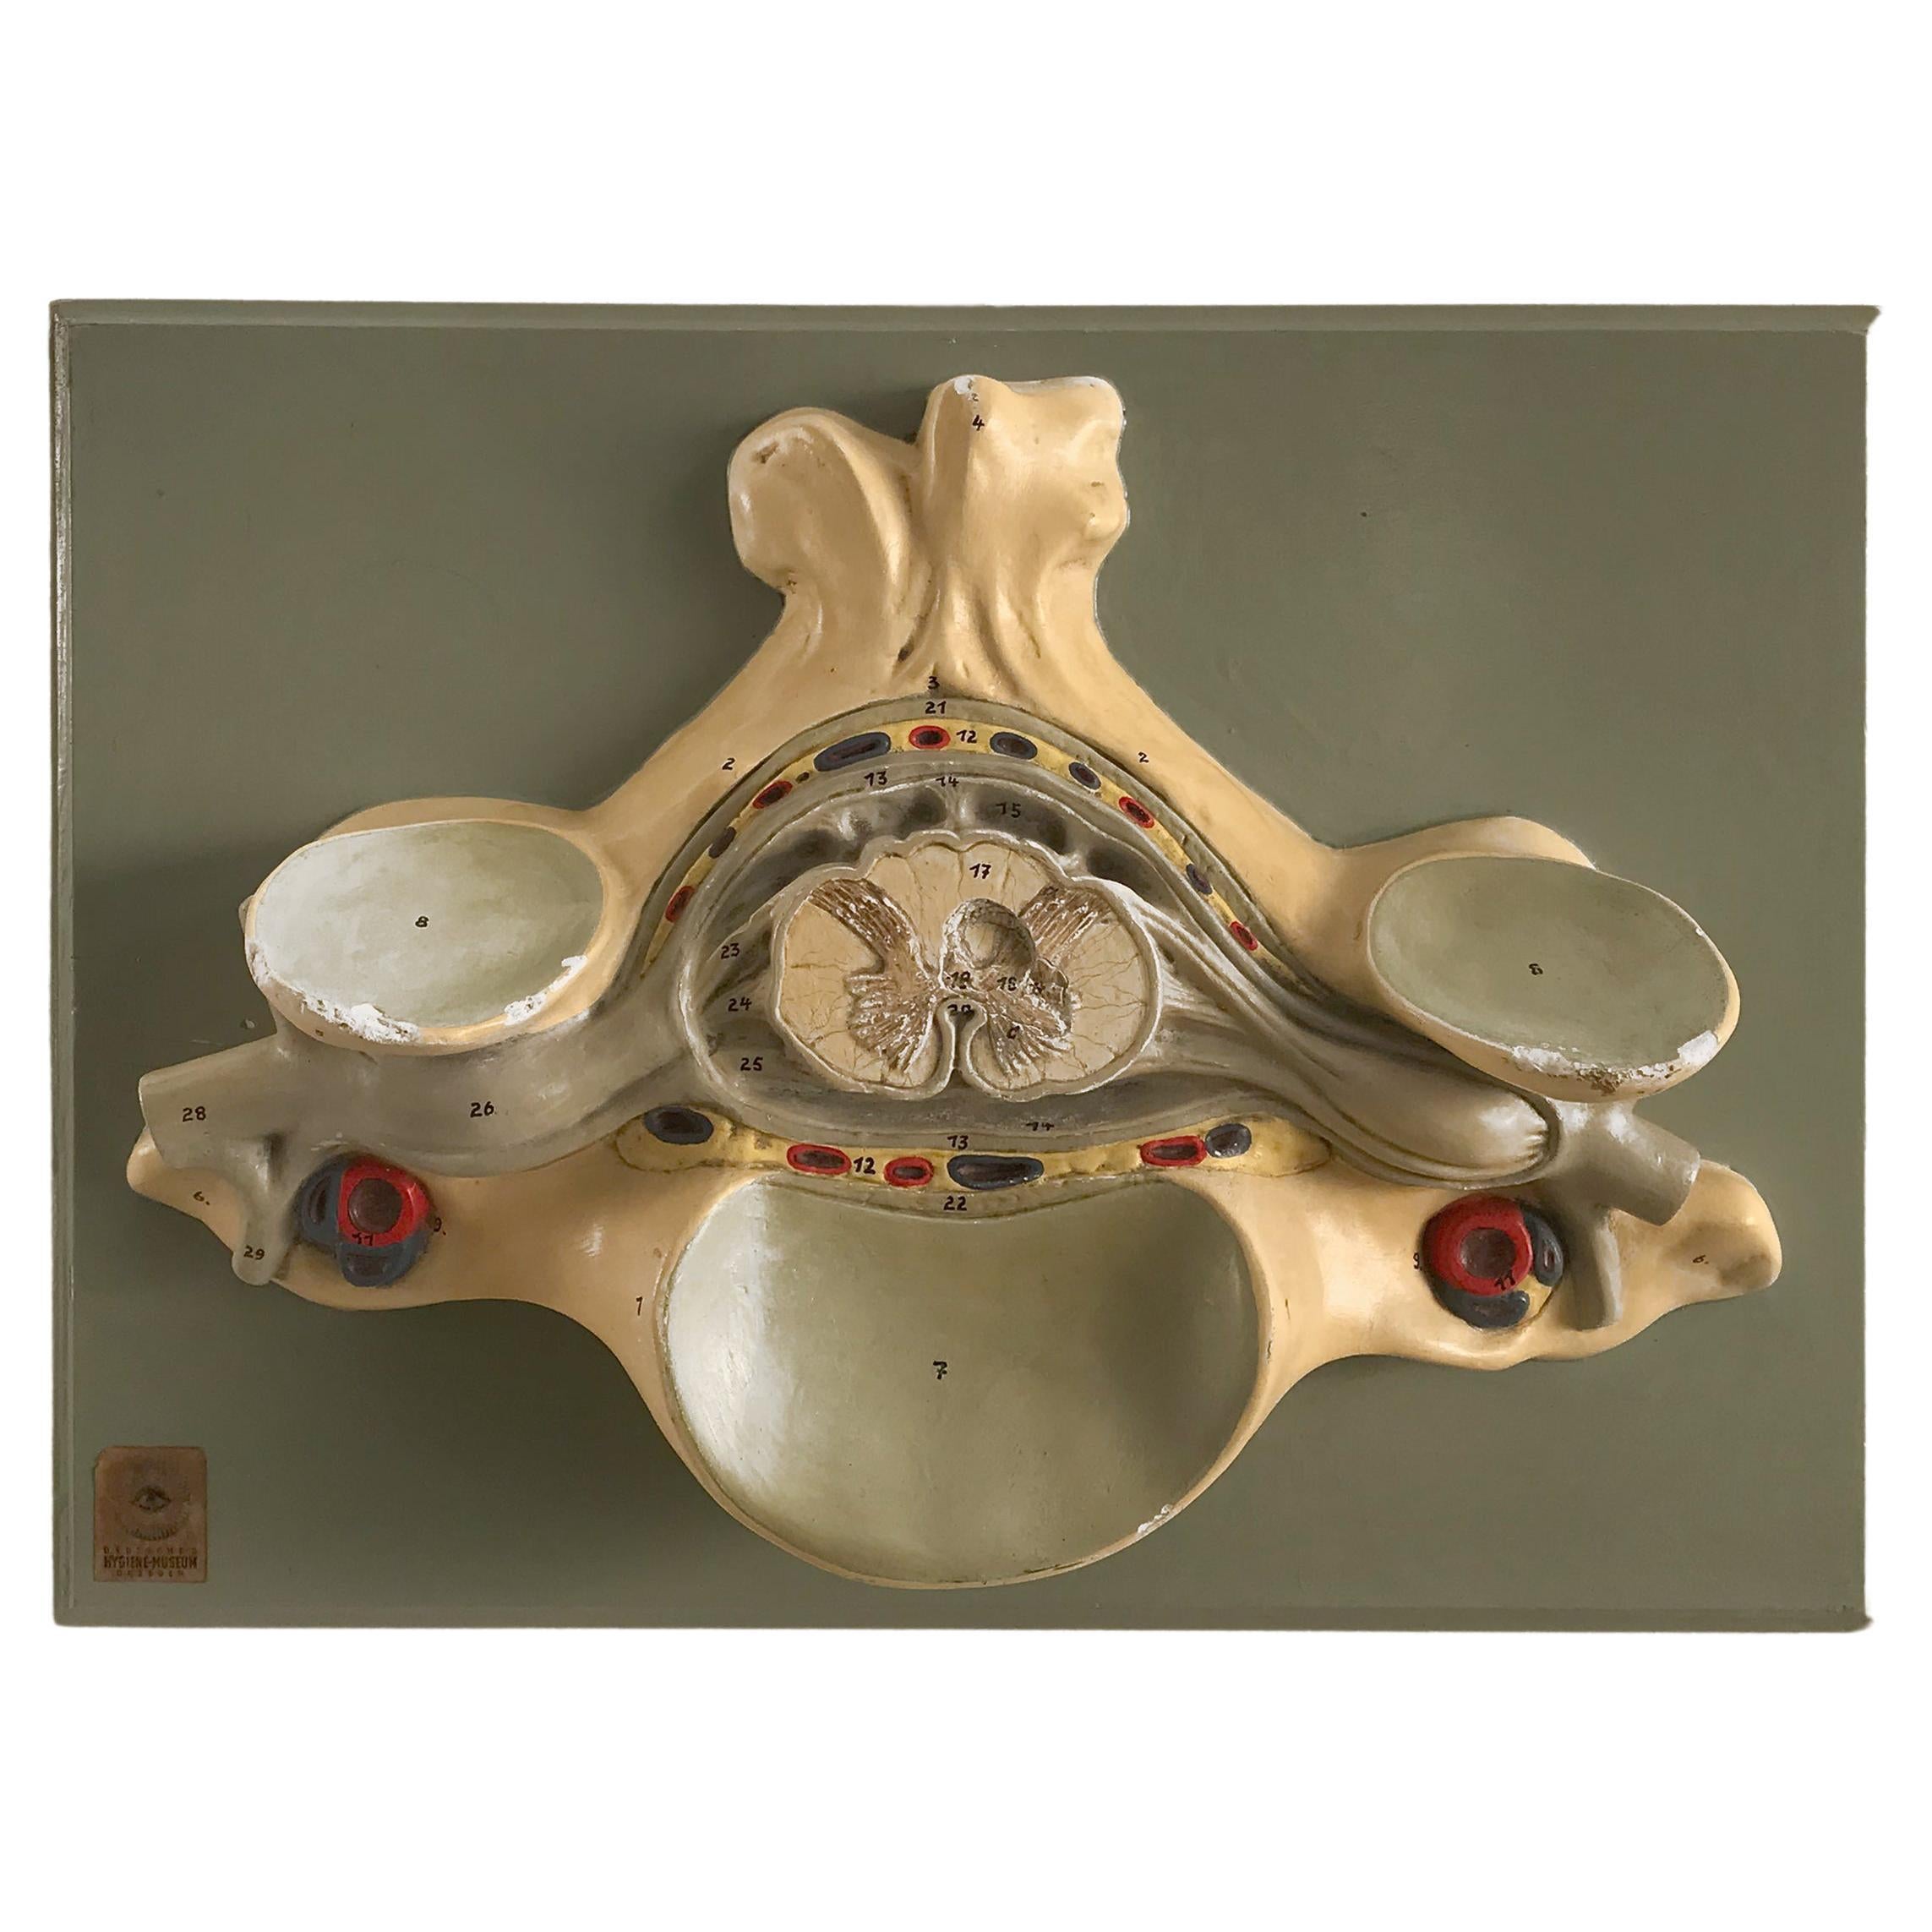 Three-Dimensional Midcentury Anatomical Wall Plaster Sculpture, Germany, 1950s For Sale